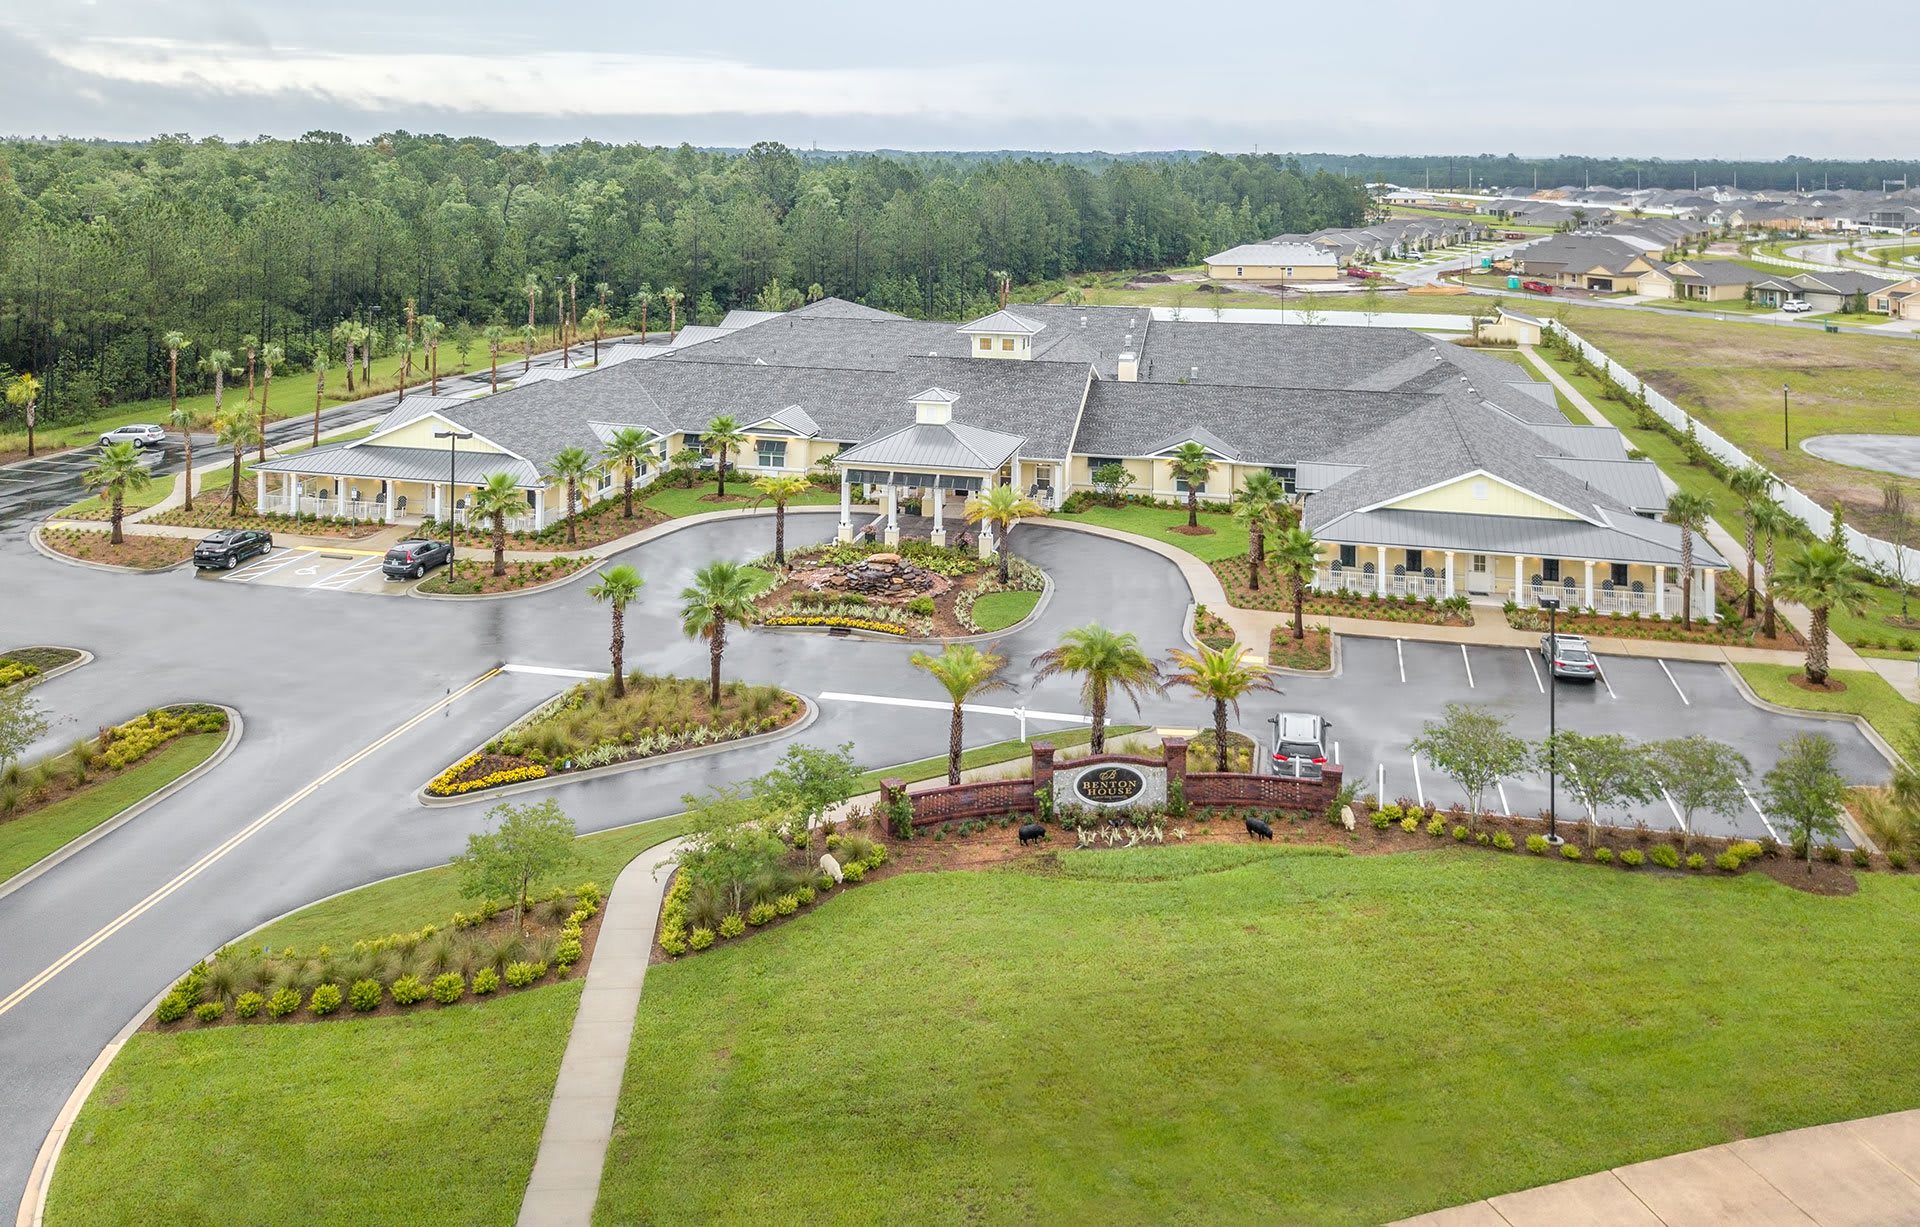 Benton House at Oakleaf aerial view of community